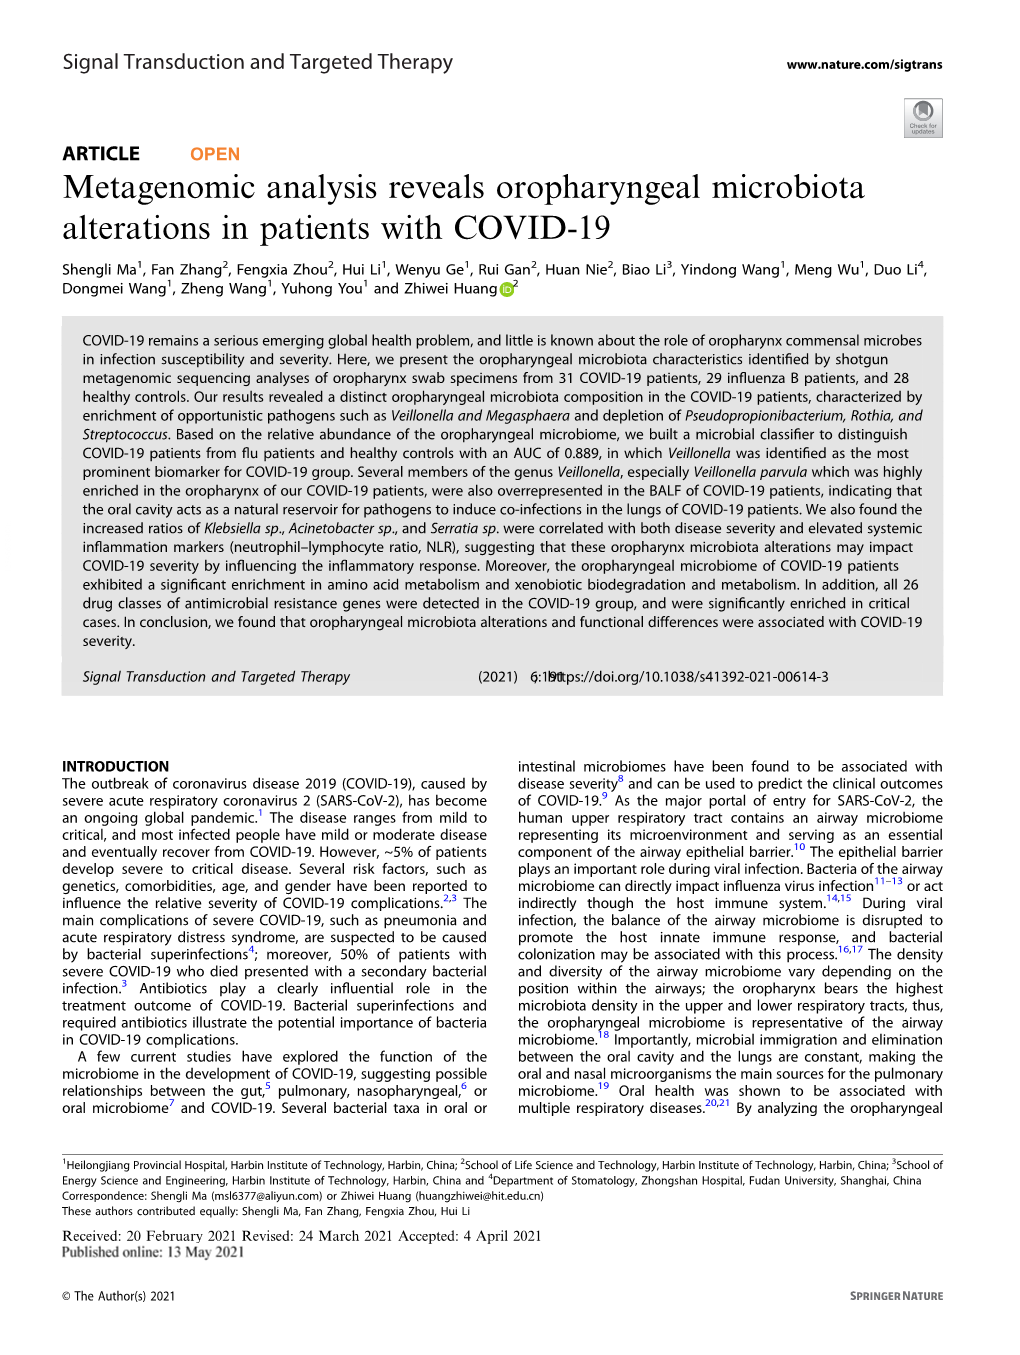 Metagenomic Analysis Reveals Oropharyngeal Microbiota Alterations in Patients with COVID-19